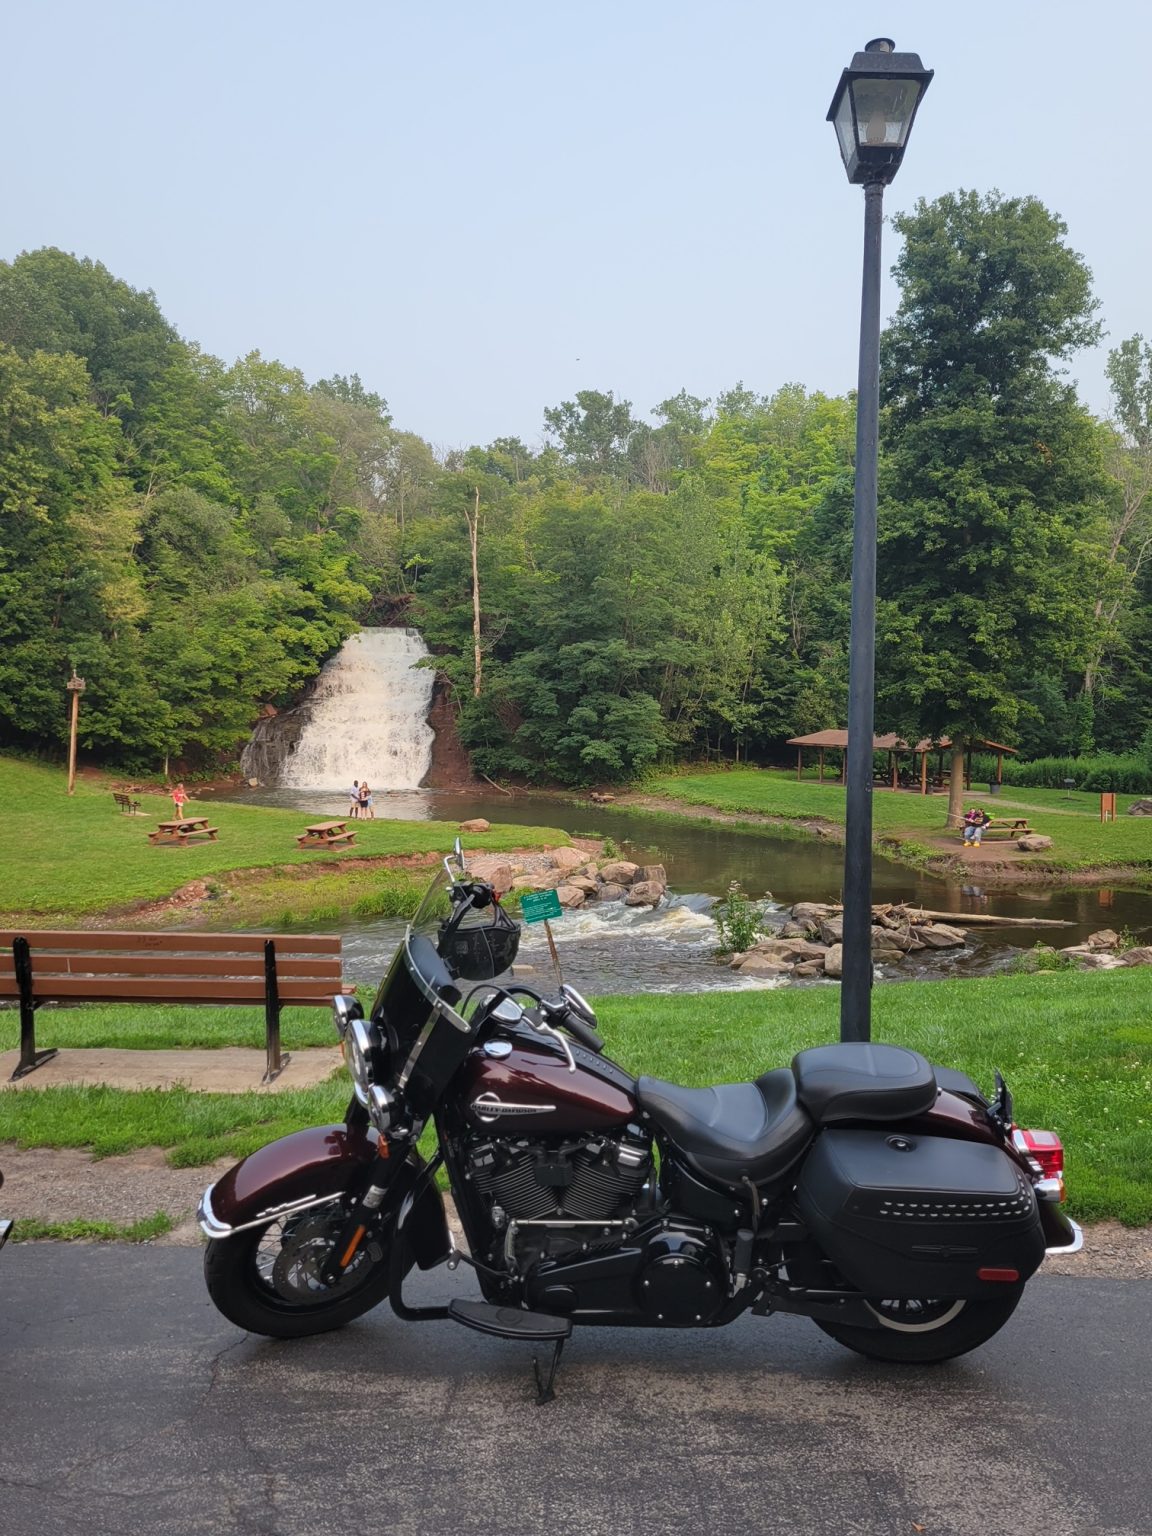 Both short and long adventures are easy and comfortable on the Heritage. Here, Kathy takes a day ride to visit Holley Falls in nearby Holley, New York.